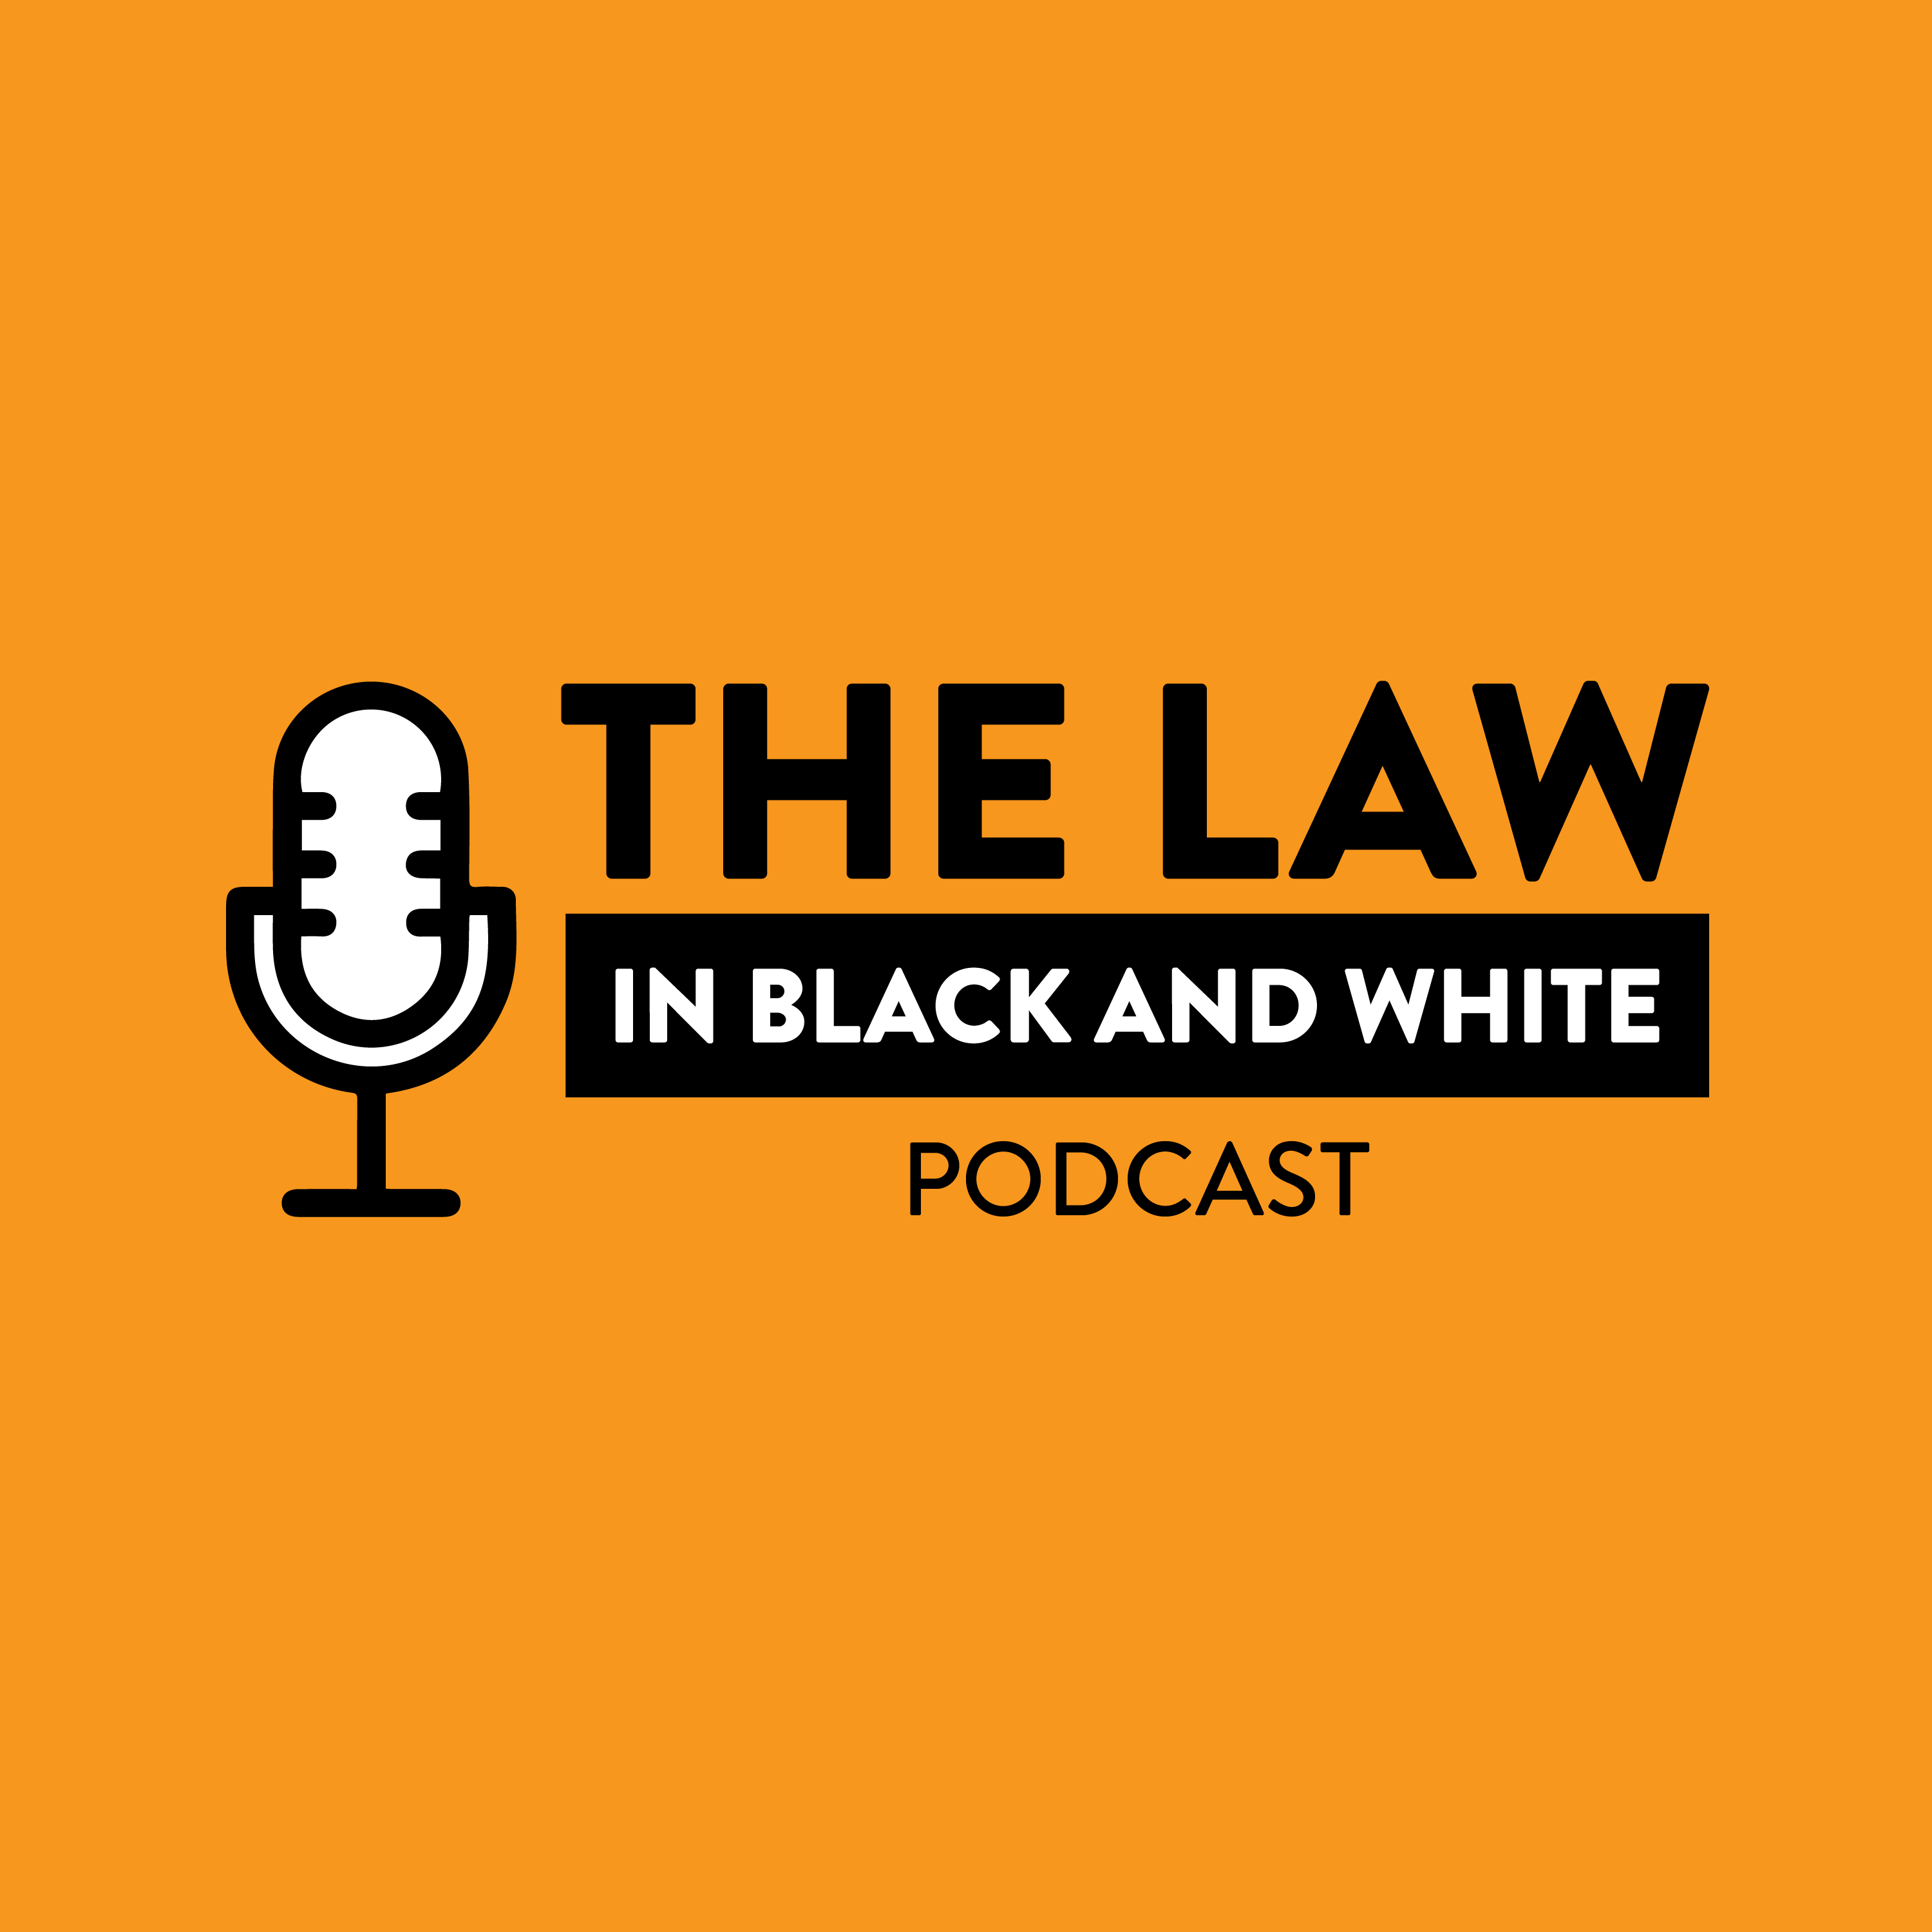 The Law in Black and White